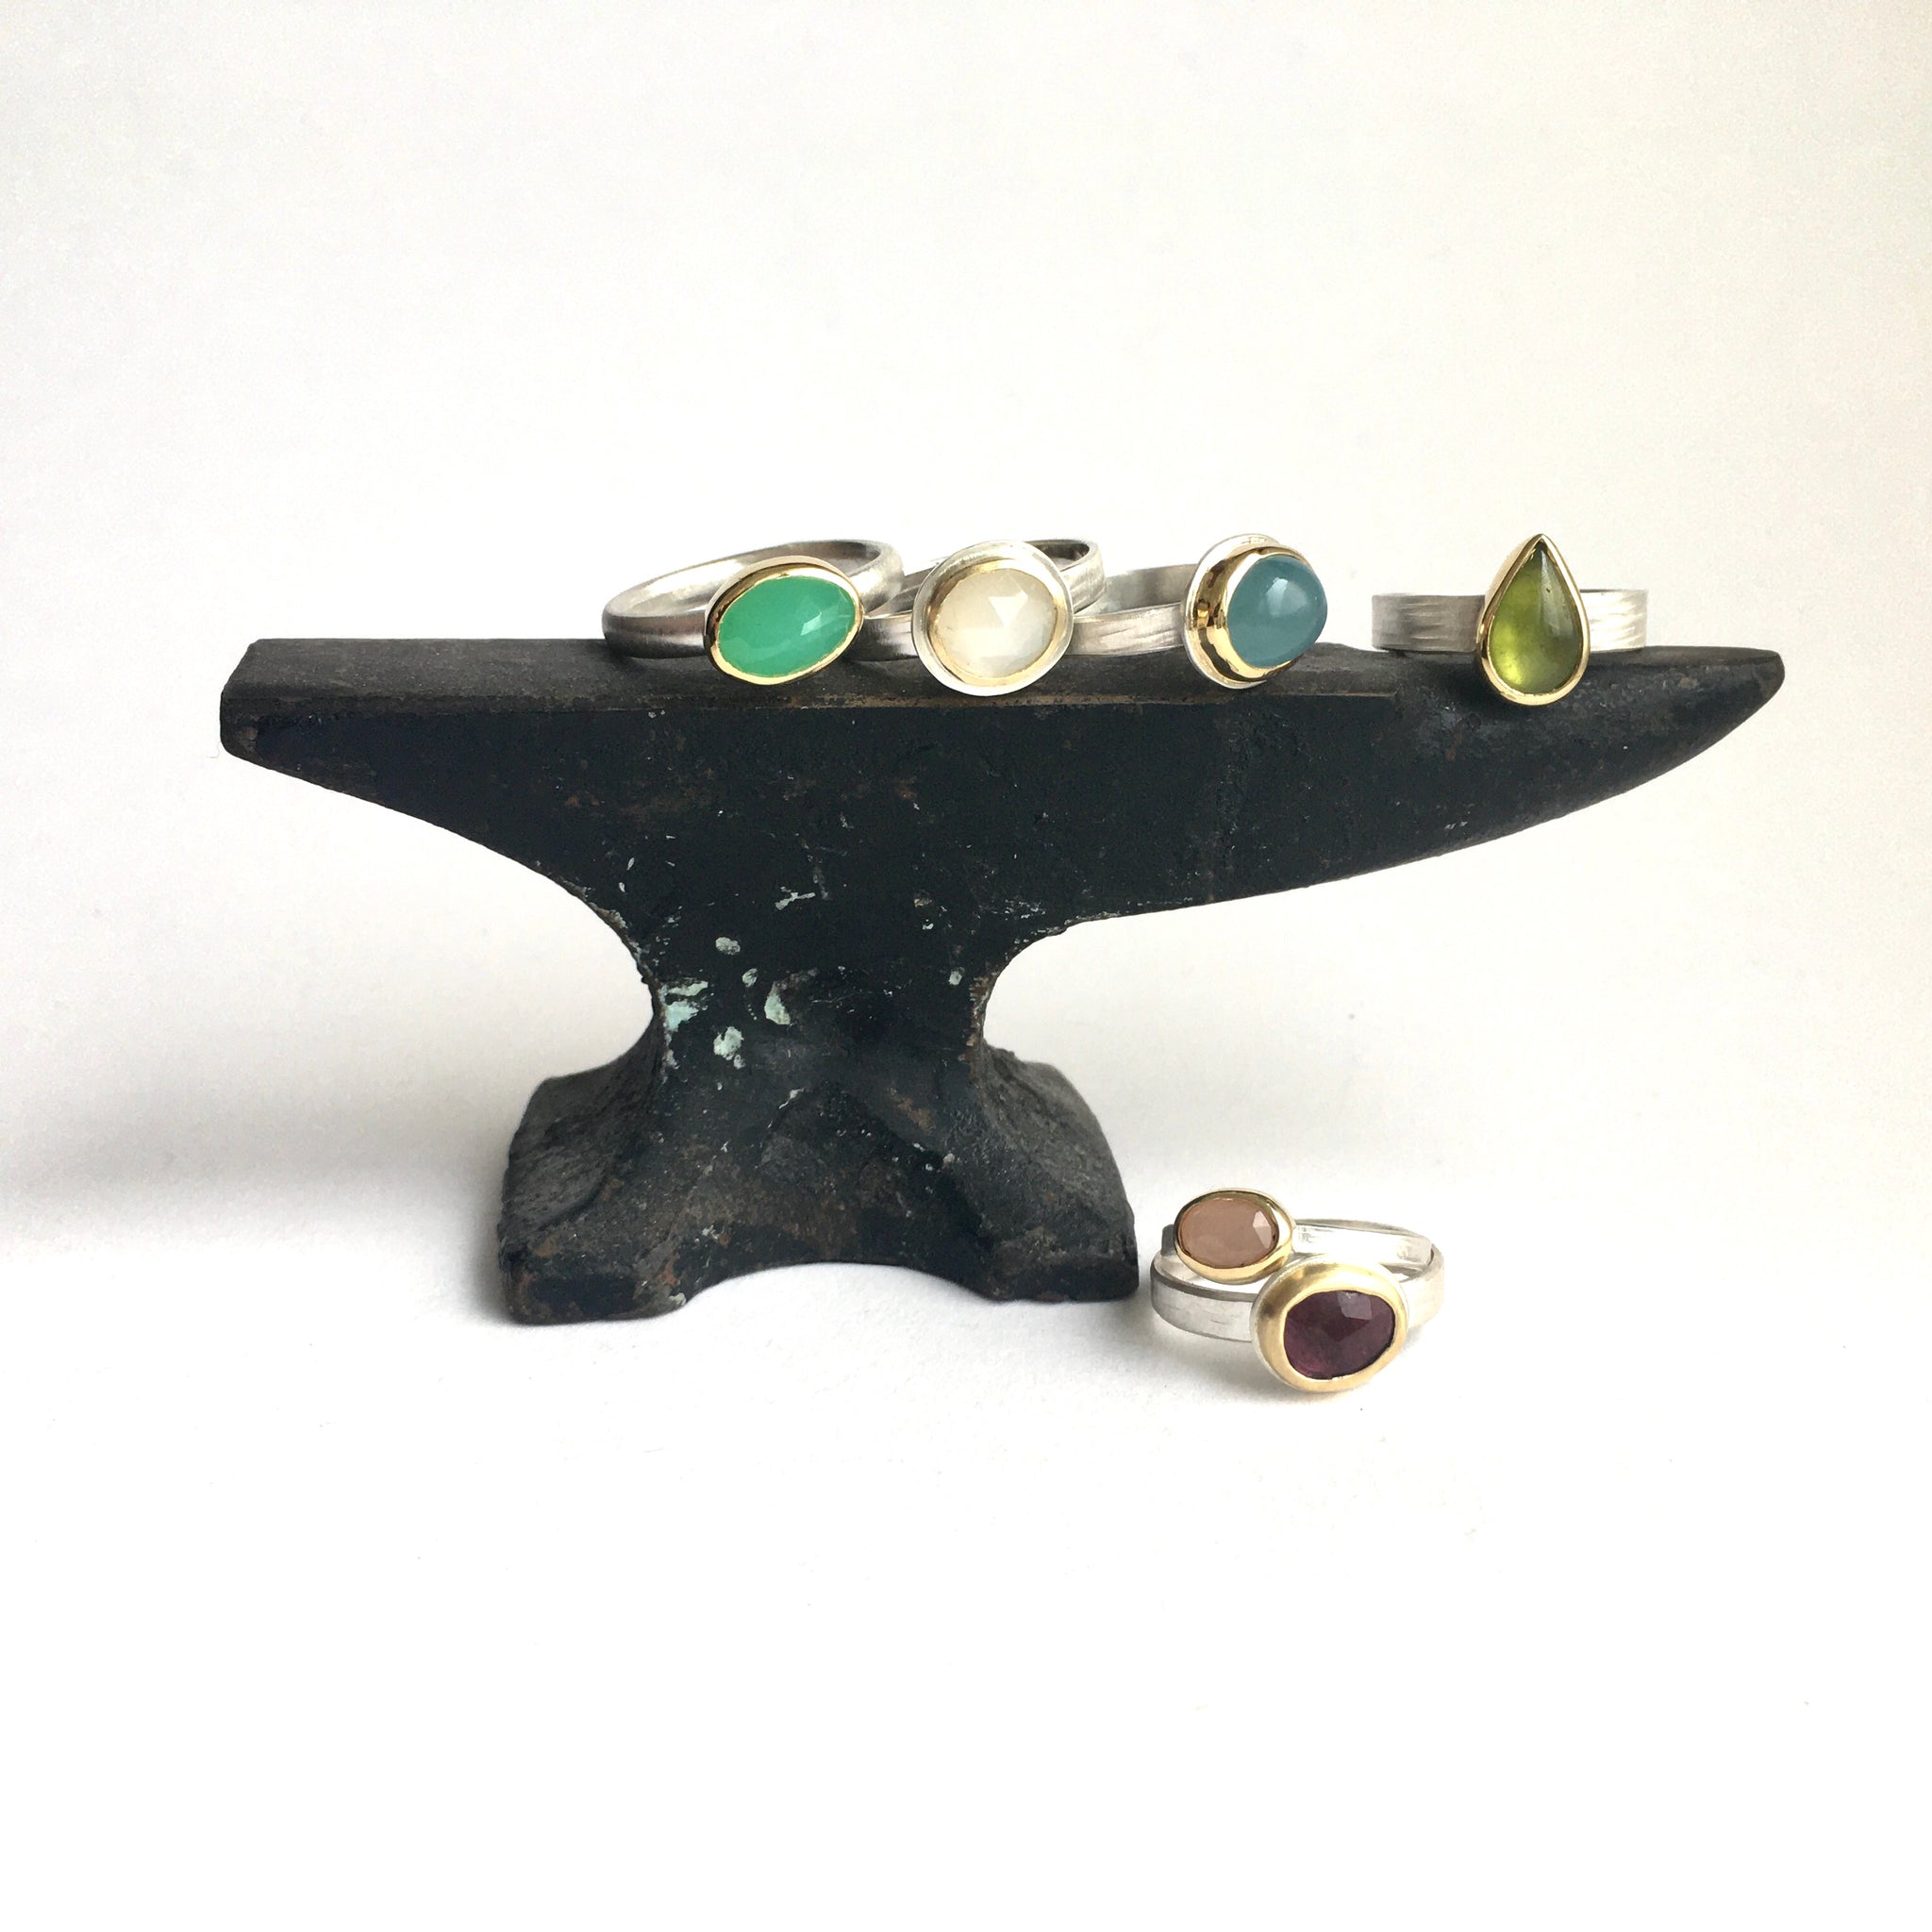 Semi precious gemstone rings set in 18 ct gold and sterling silver stacked on a small anvil by www.wyckoffsmith.com, chrysoprase, moonstone, aquamarine, lapis ring